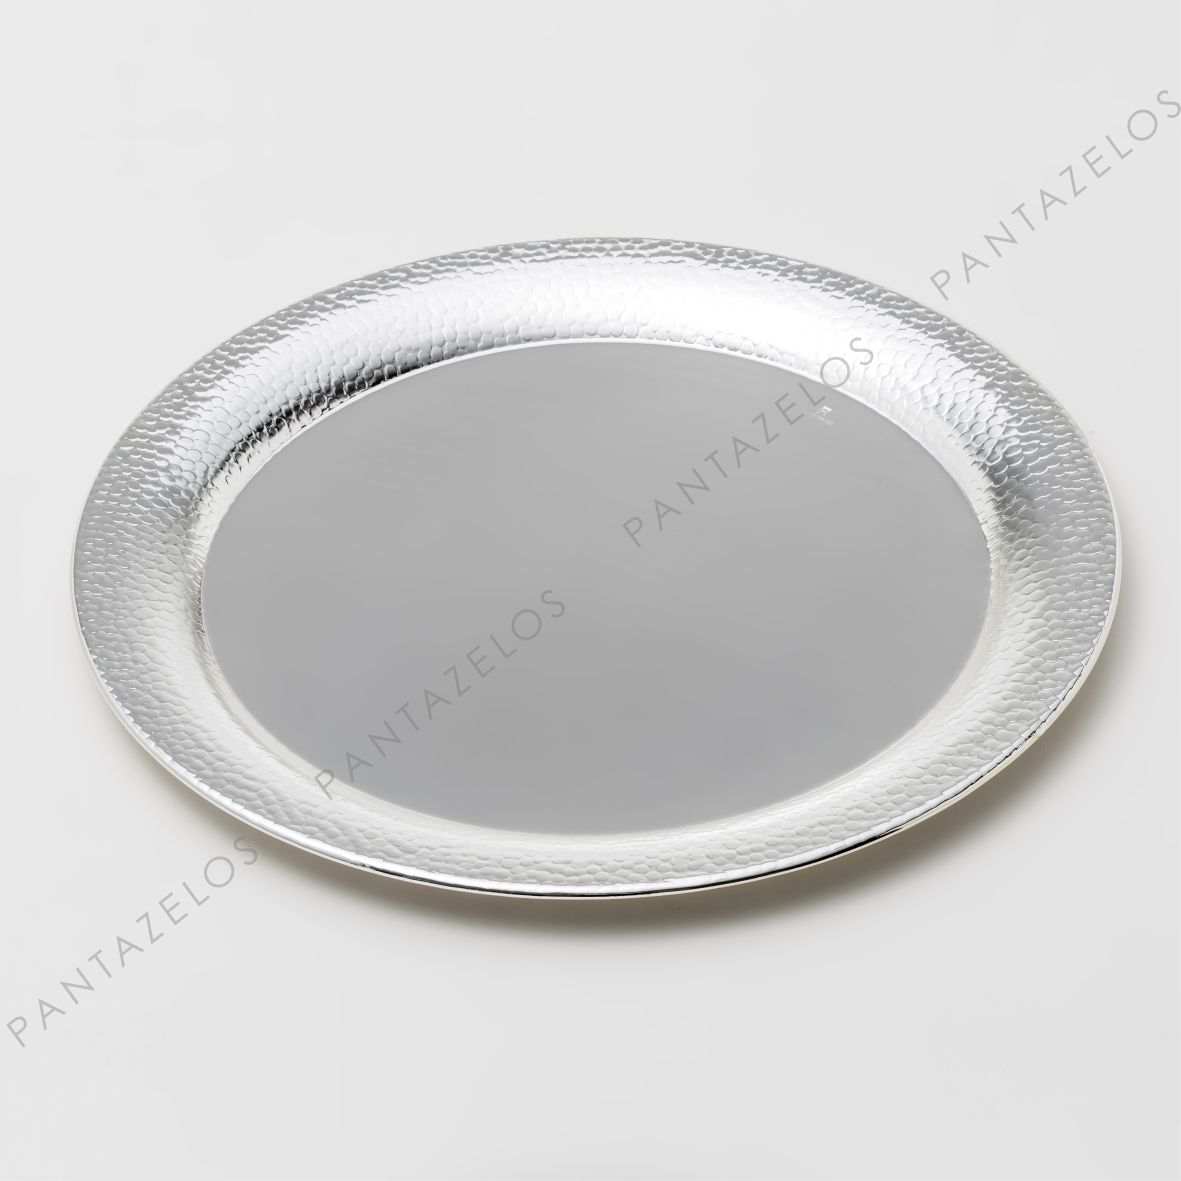 SILVER PLATED TRAY, ROUND, D. 30 CM ,HAMMERED 